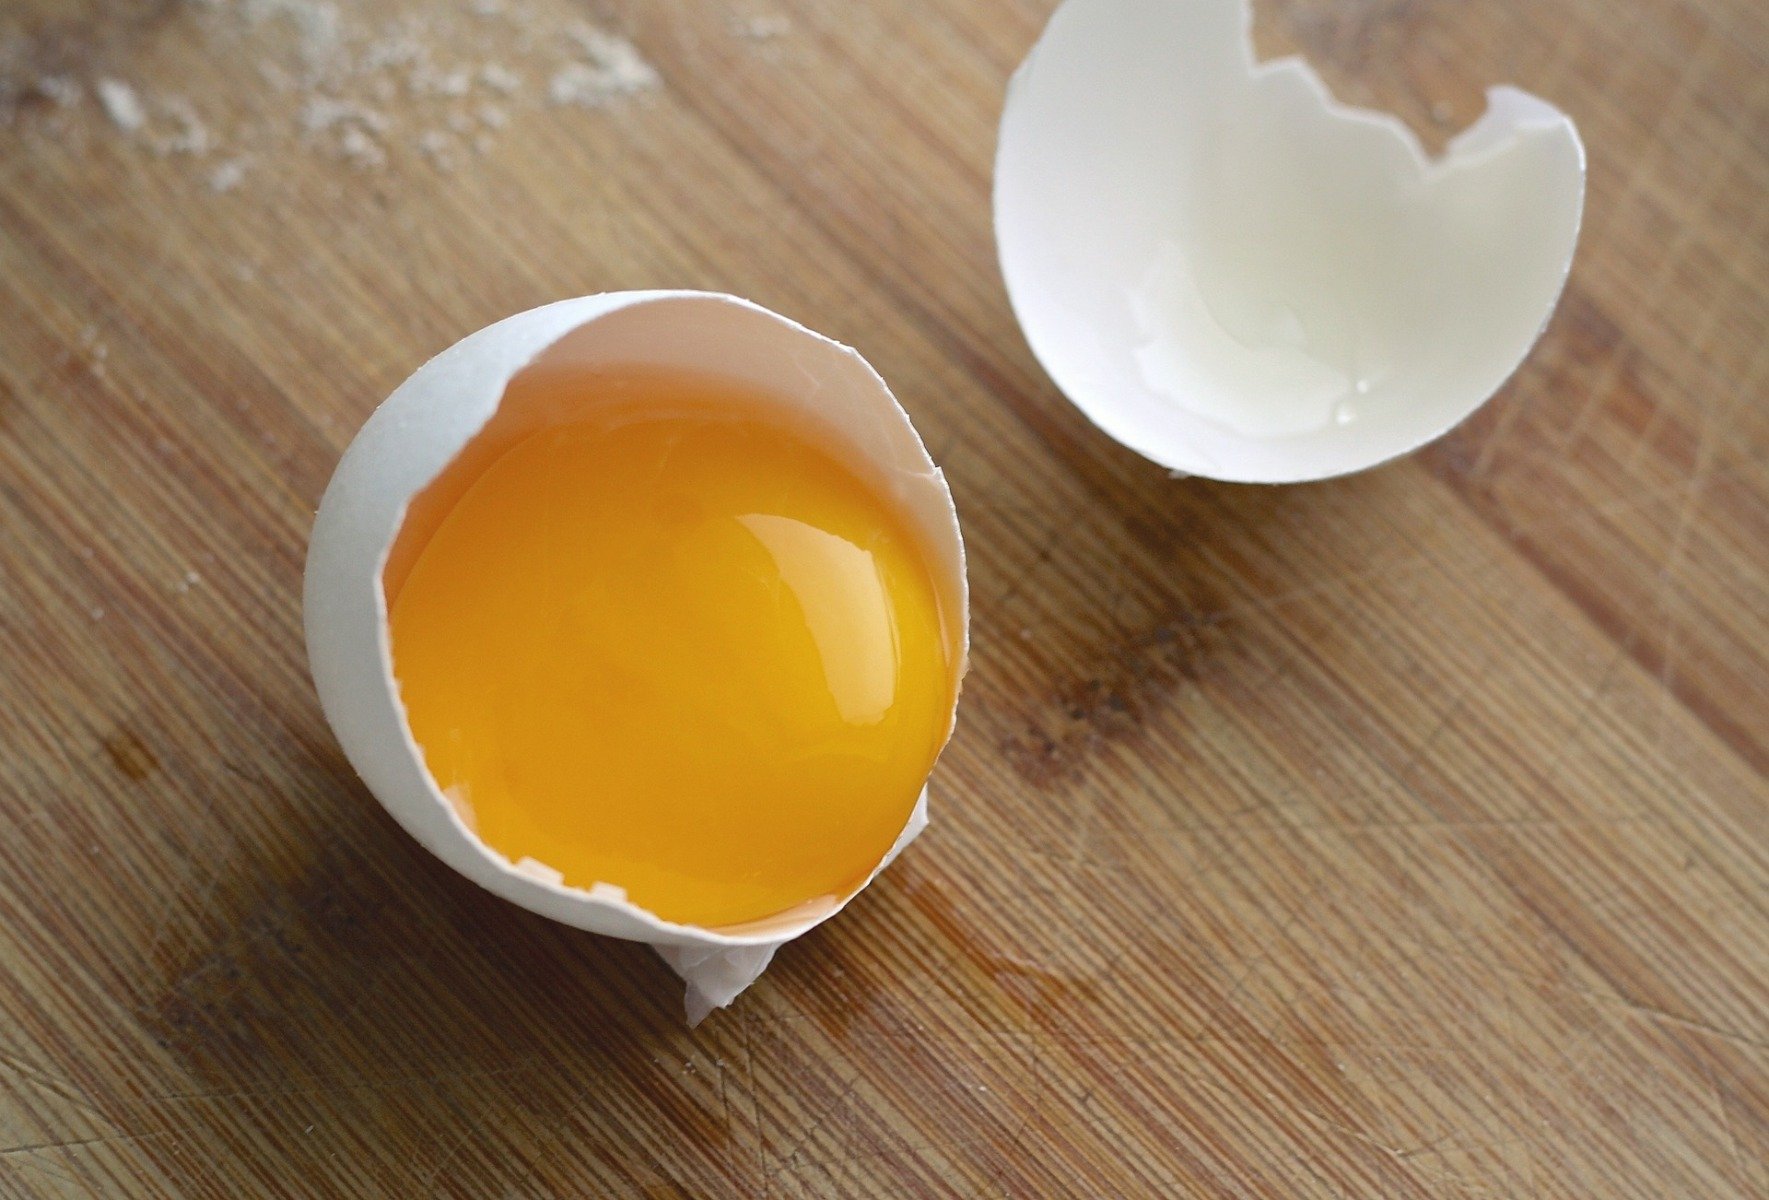 Eggs and cholesterol - the truth about nutrients and egg consumption